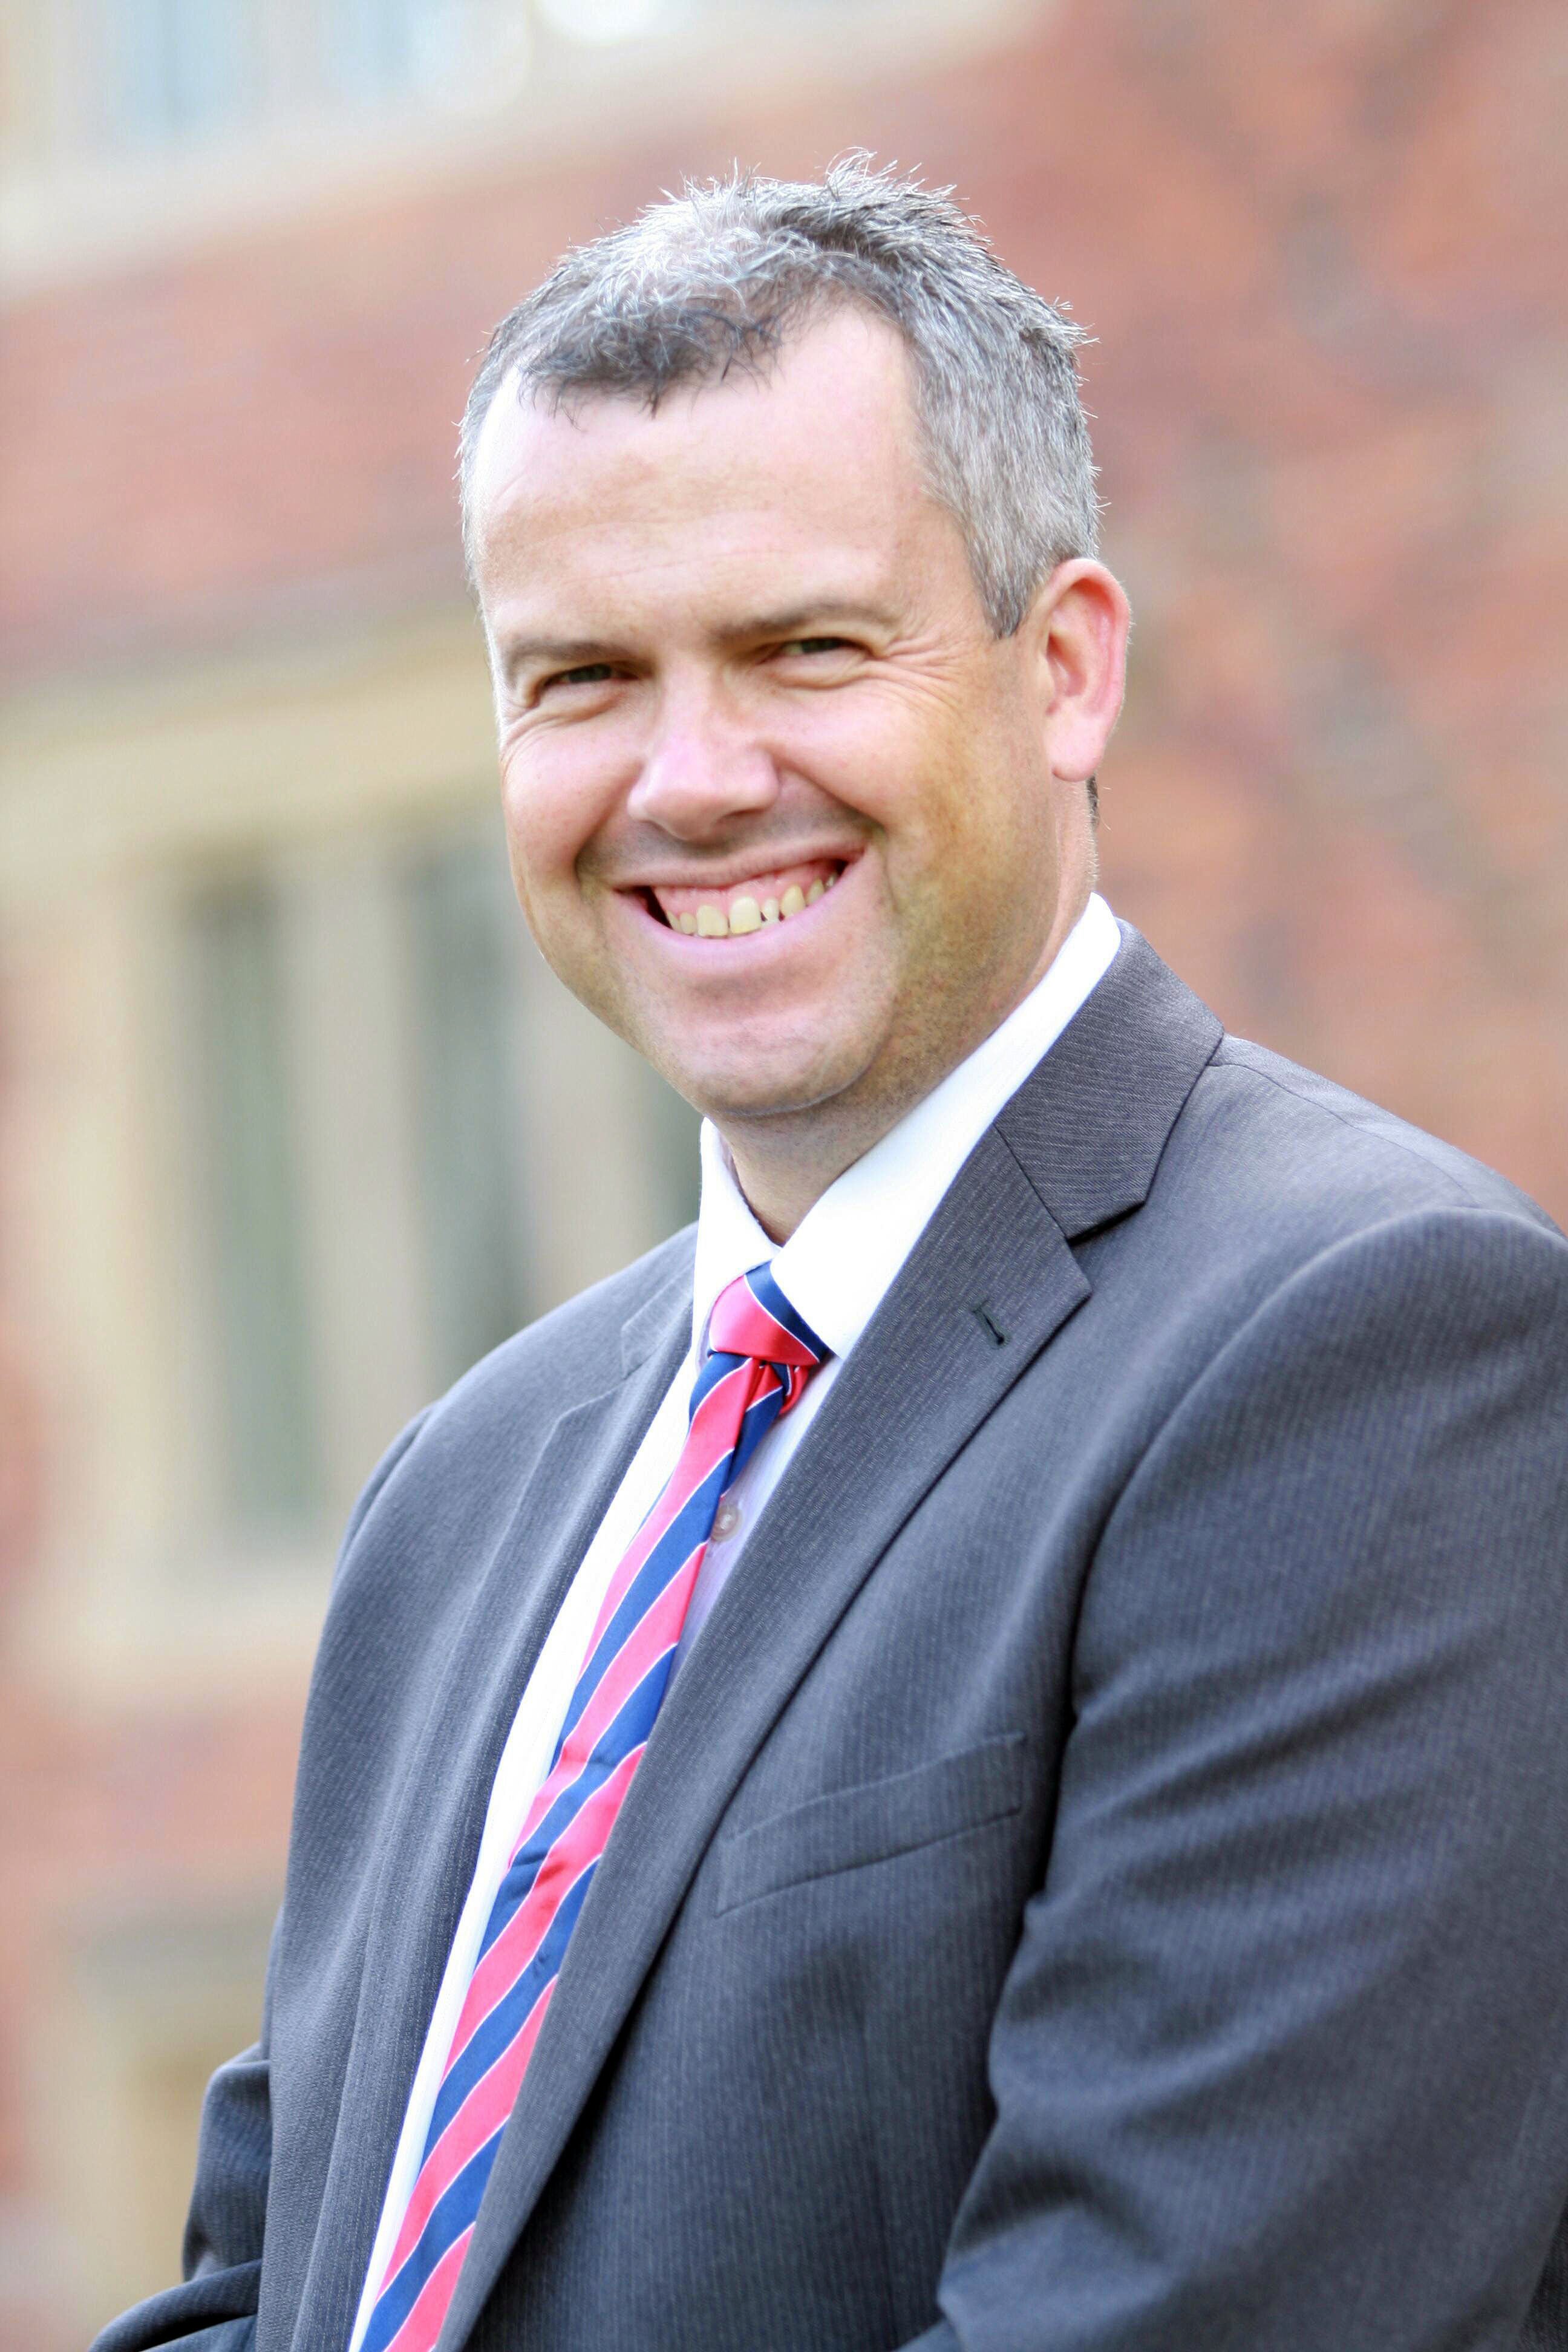 Chamber of Commerce chosen to lead skills improvement plan for Cheshire